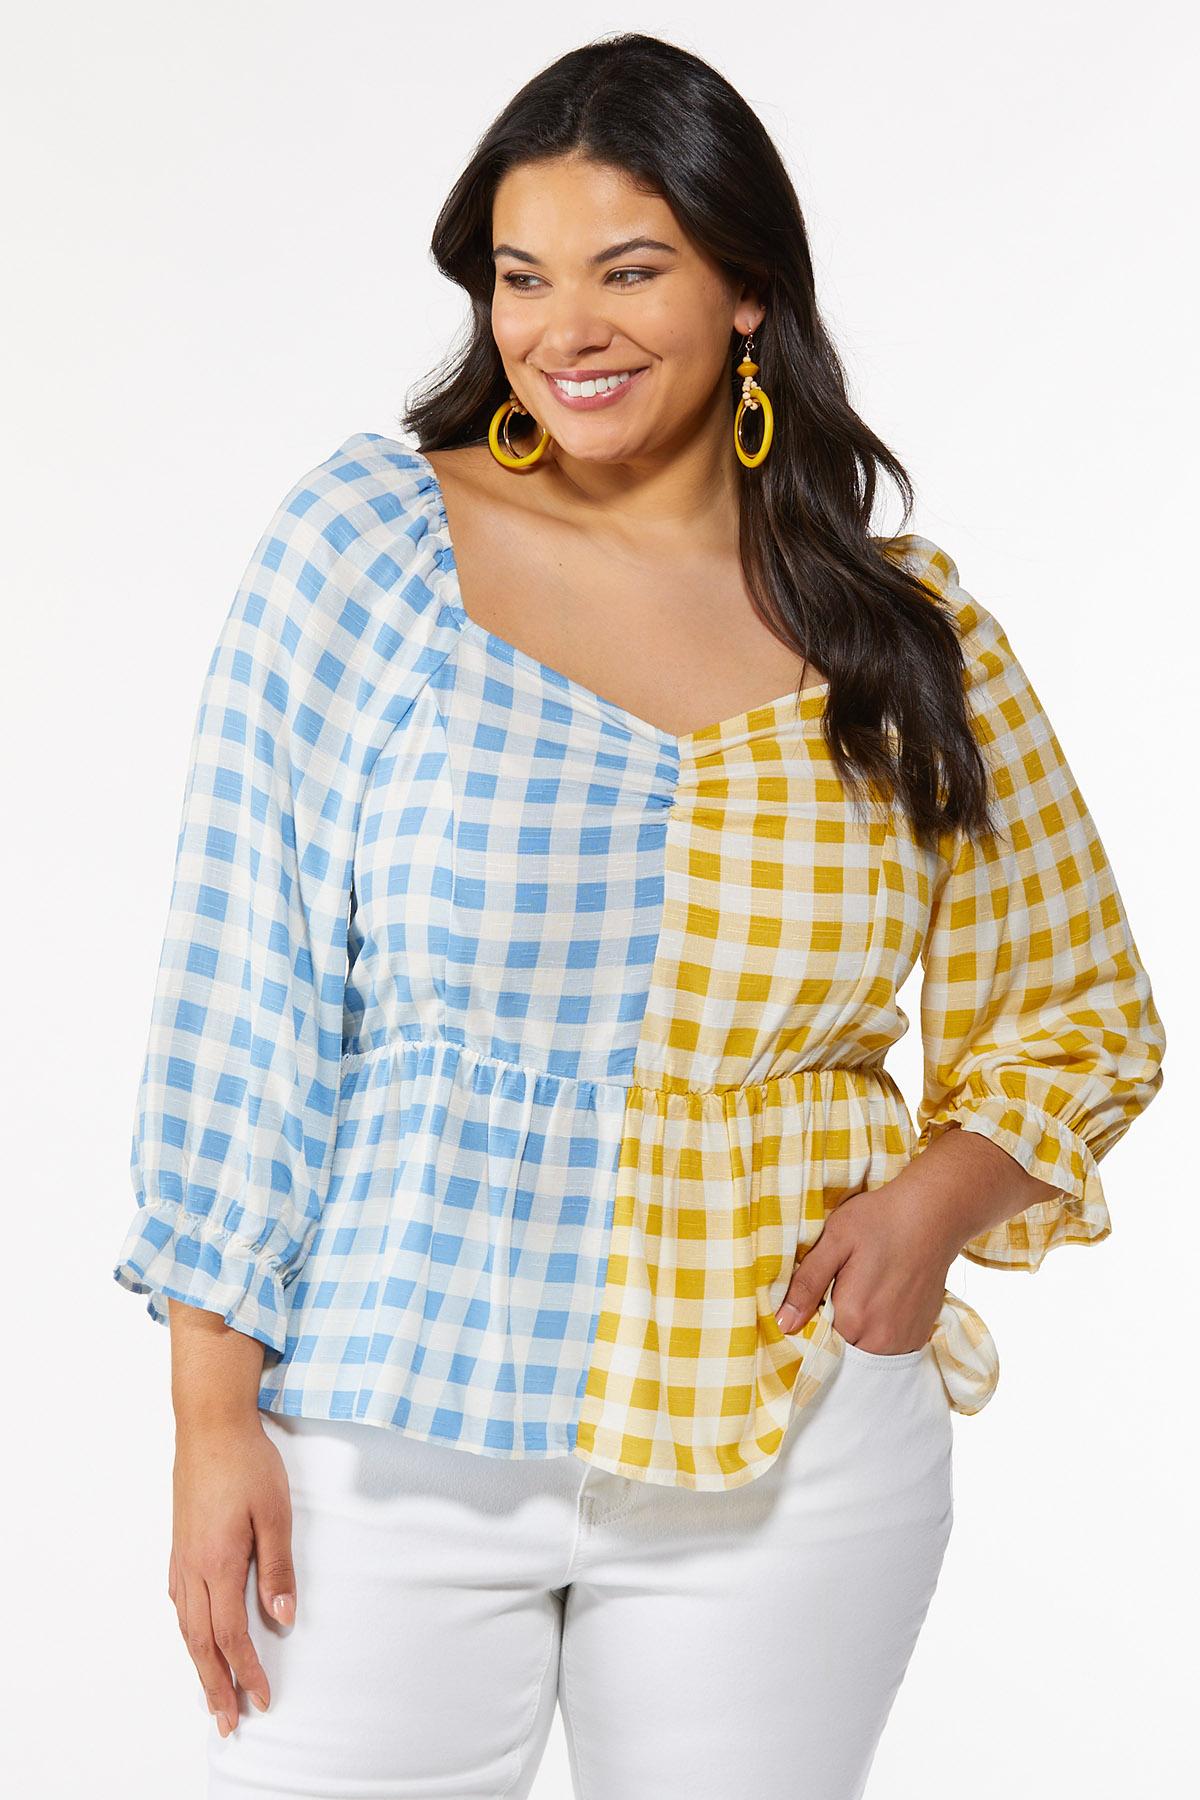 Plus Size Two-Toned Gingham Top Shirts